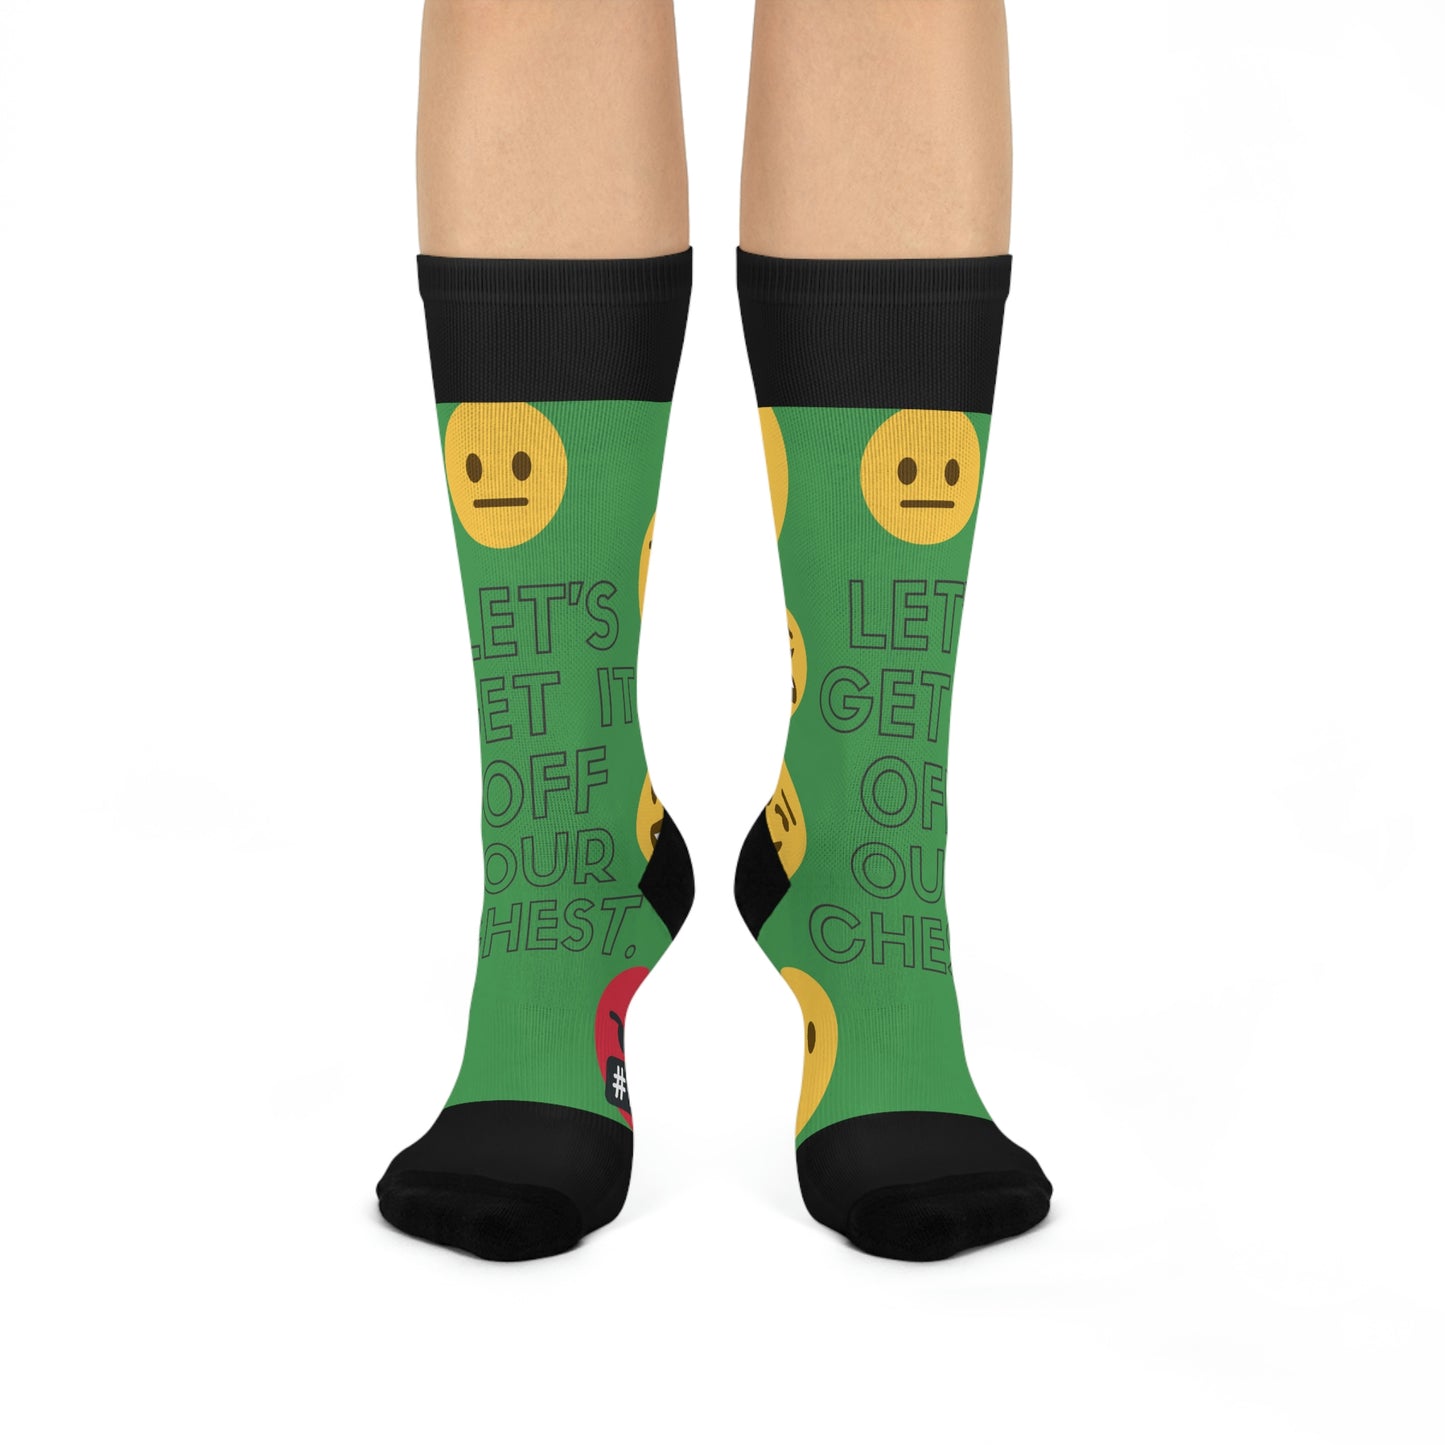 Emoji-tional Crew Socks | BKLA | shoes & accessories | backpack, hat, phone cover, tote bags, clutch bags